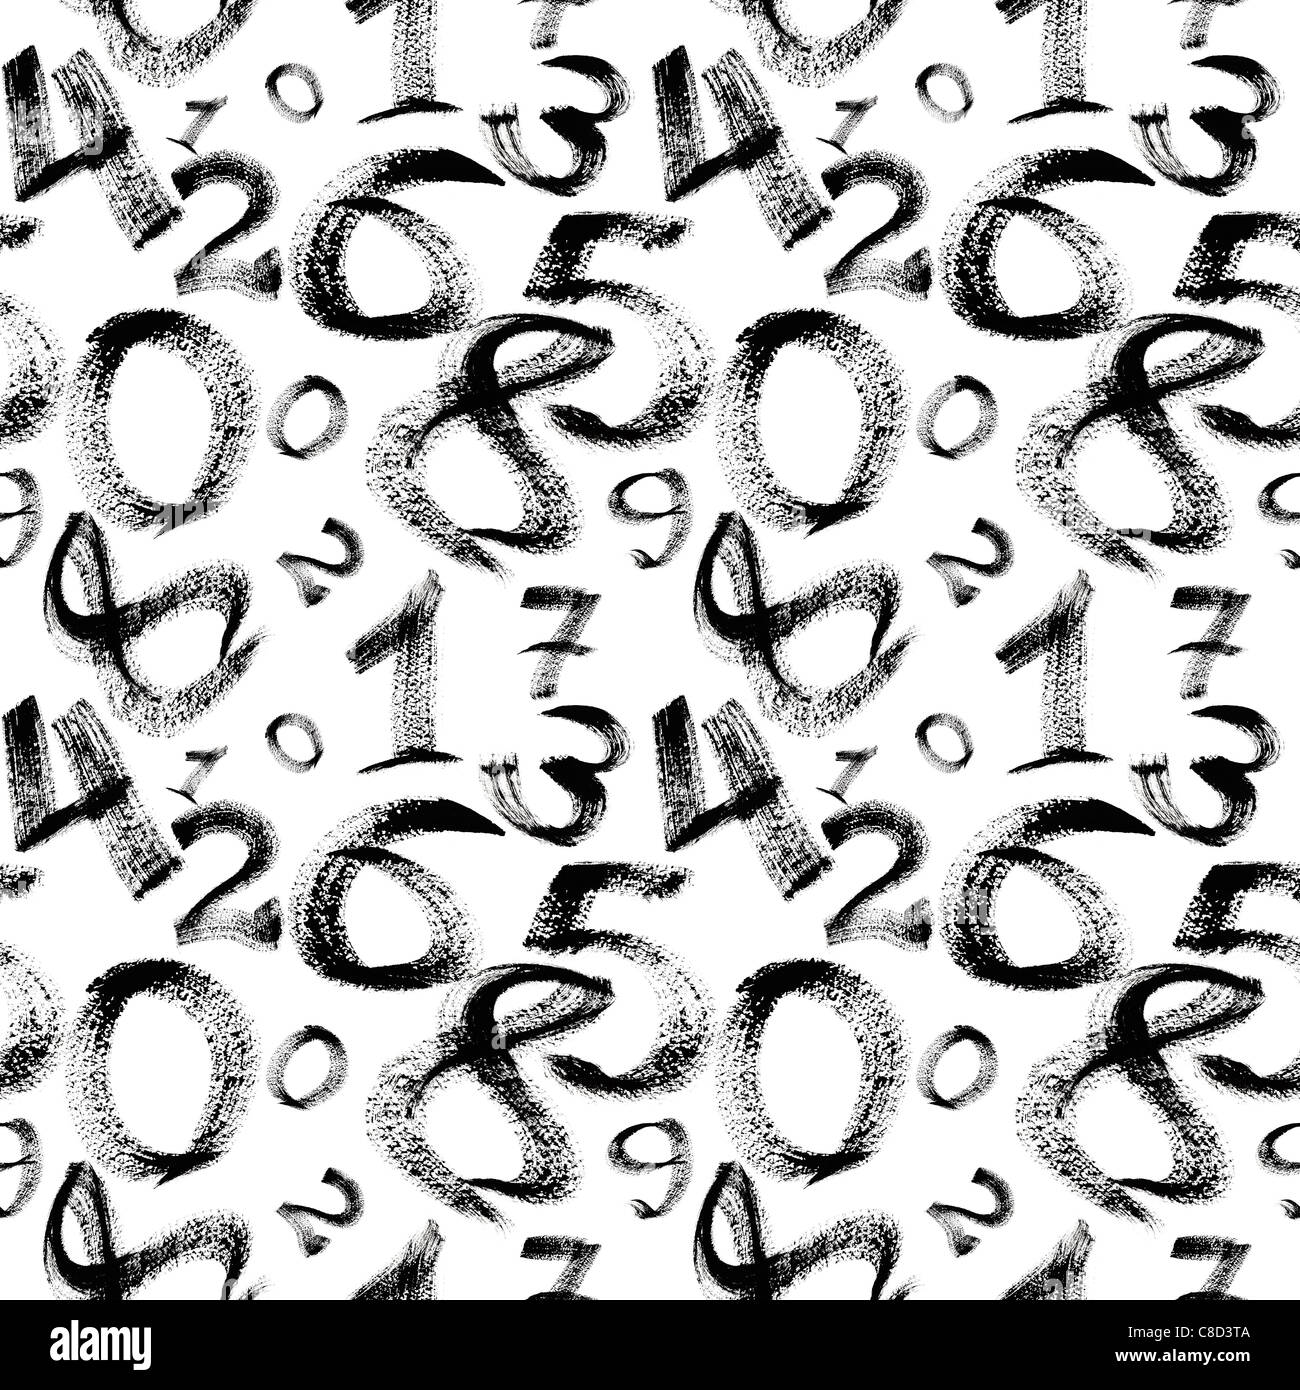 Seamless pattern - Black numbers over white background Stock Photo